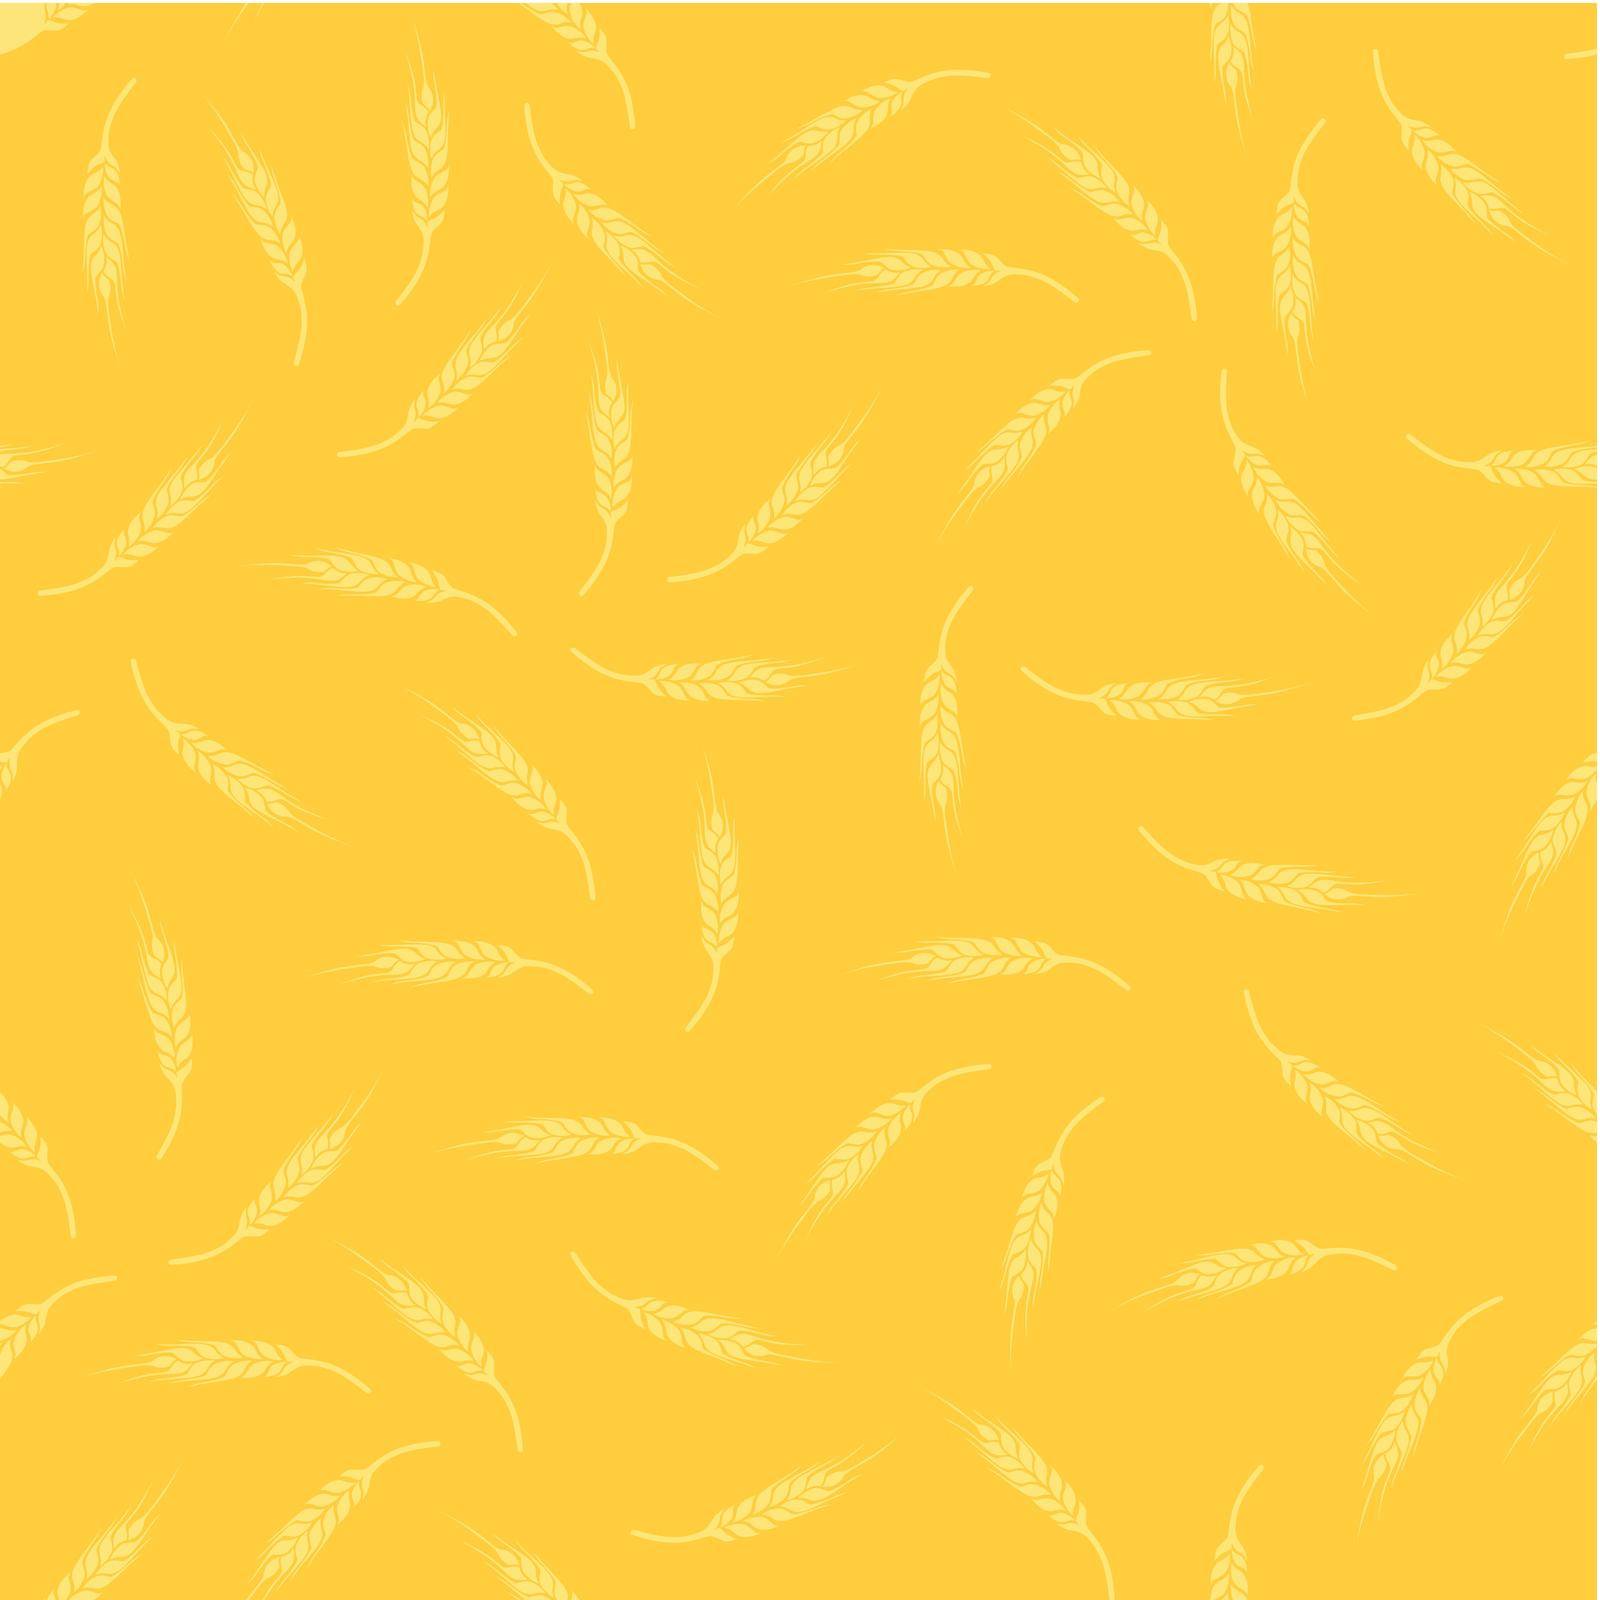 Texture with Ears of Wheat in gold orange color, Vector Looped Pattern for agriculture company